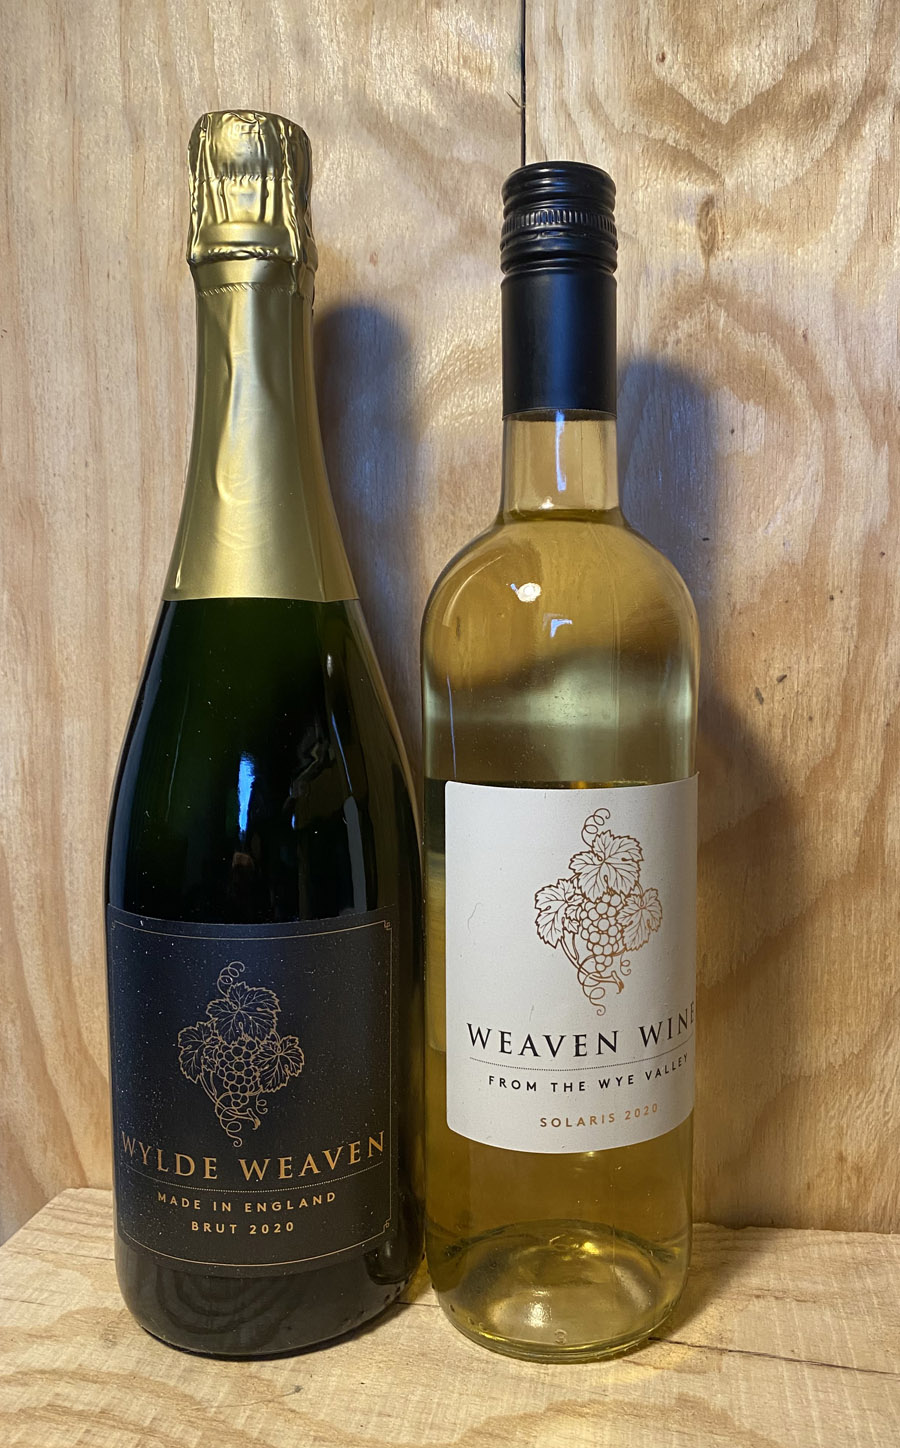 Wylde Weaven Vineyard, Wine made in the traditional way in Herefordshire, white wine from the Wye Valley close to Hoarwithy, Solaris grapes, white wine made in Herefordshire